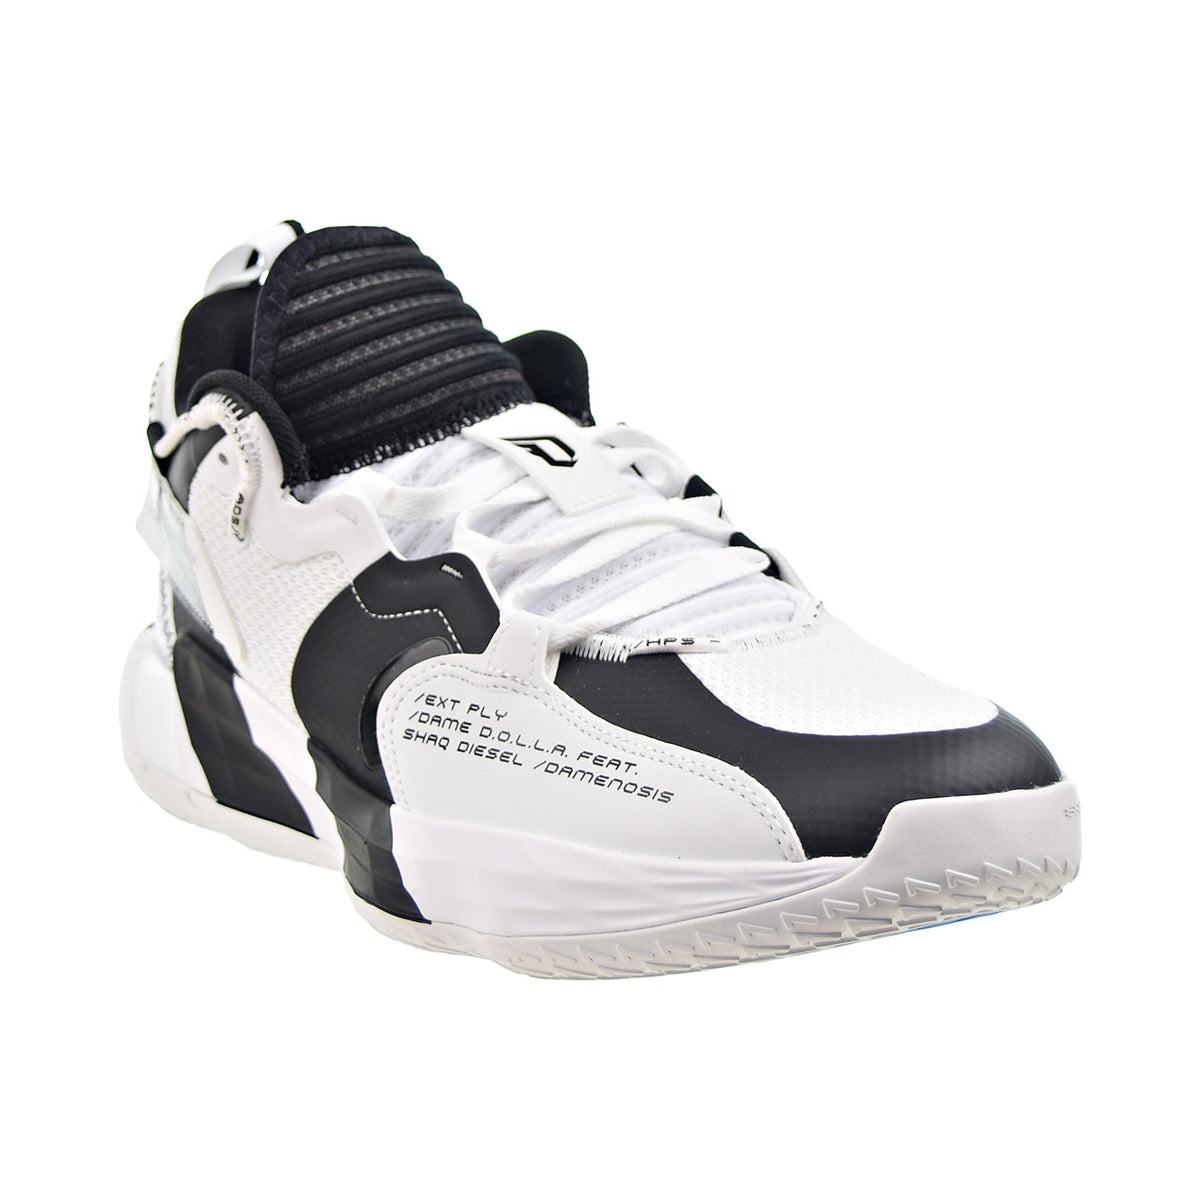 udtrykkeligt at straffe for meget Adidas Dame 7 Extply Shaqnosis/Damenosis Men's Shoes Cloud White-Silve –  Sports Plaza NY